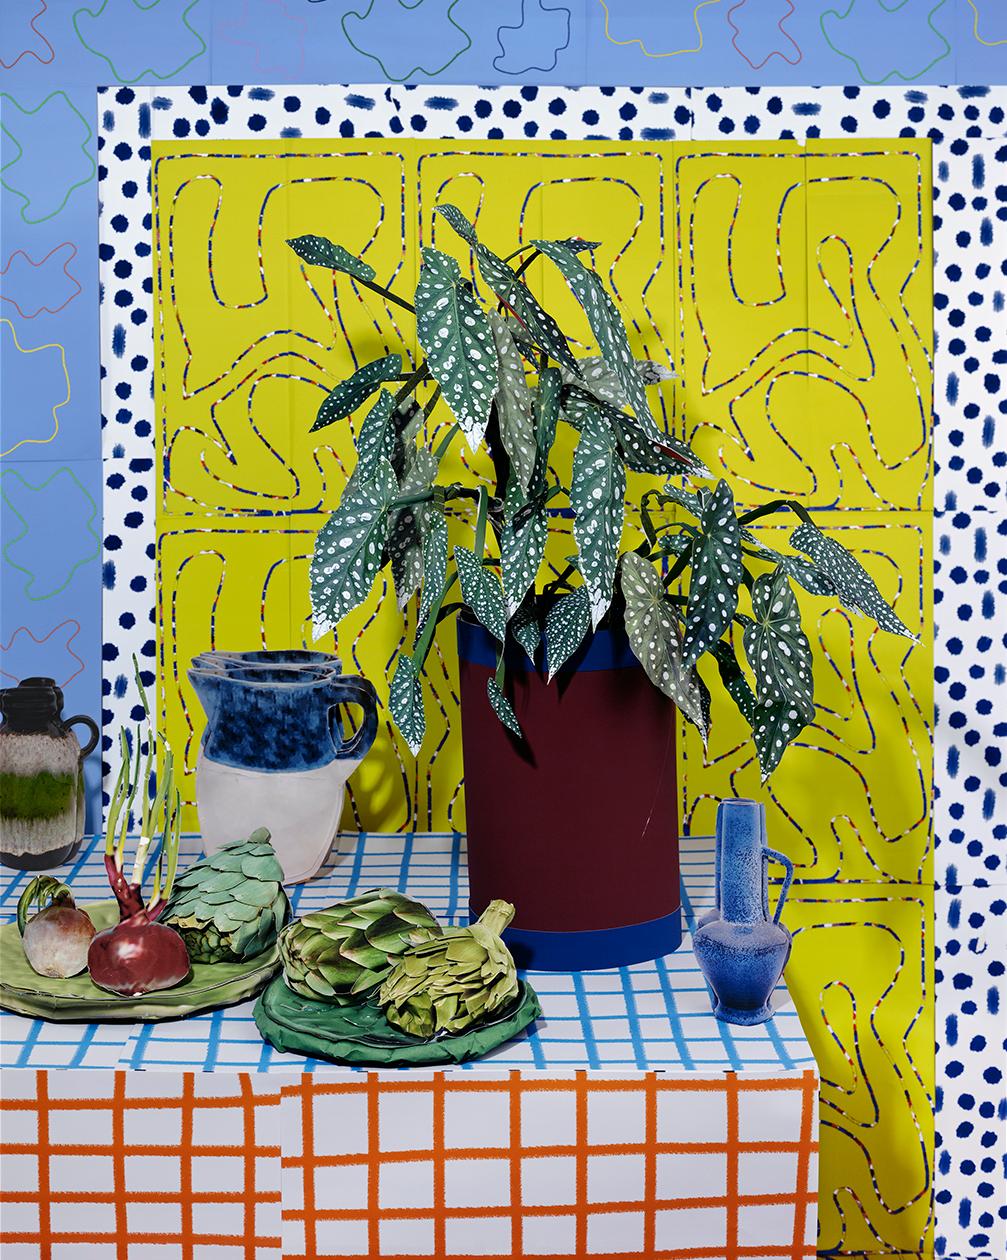 Daniel Gordon
Begonia and Artichoke, 2021
Pigment print
49 3/4 x 39 3/4 inches
Edition of 3 + 1 AP

Daniel Gordon (born 1980) uses art historical traditions, such as the still life and portraiture, as departure points for his contemporary